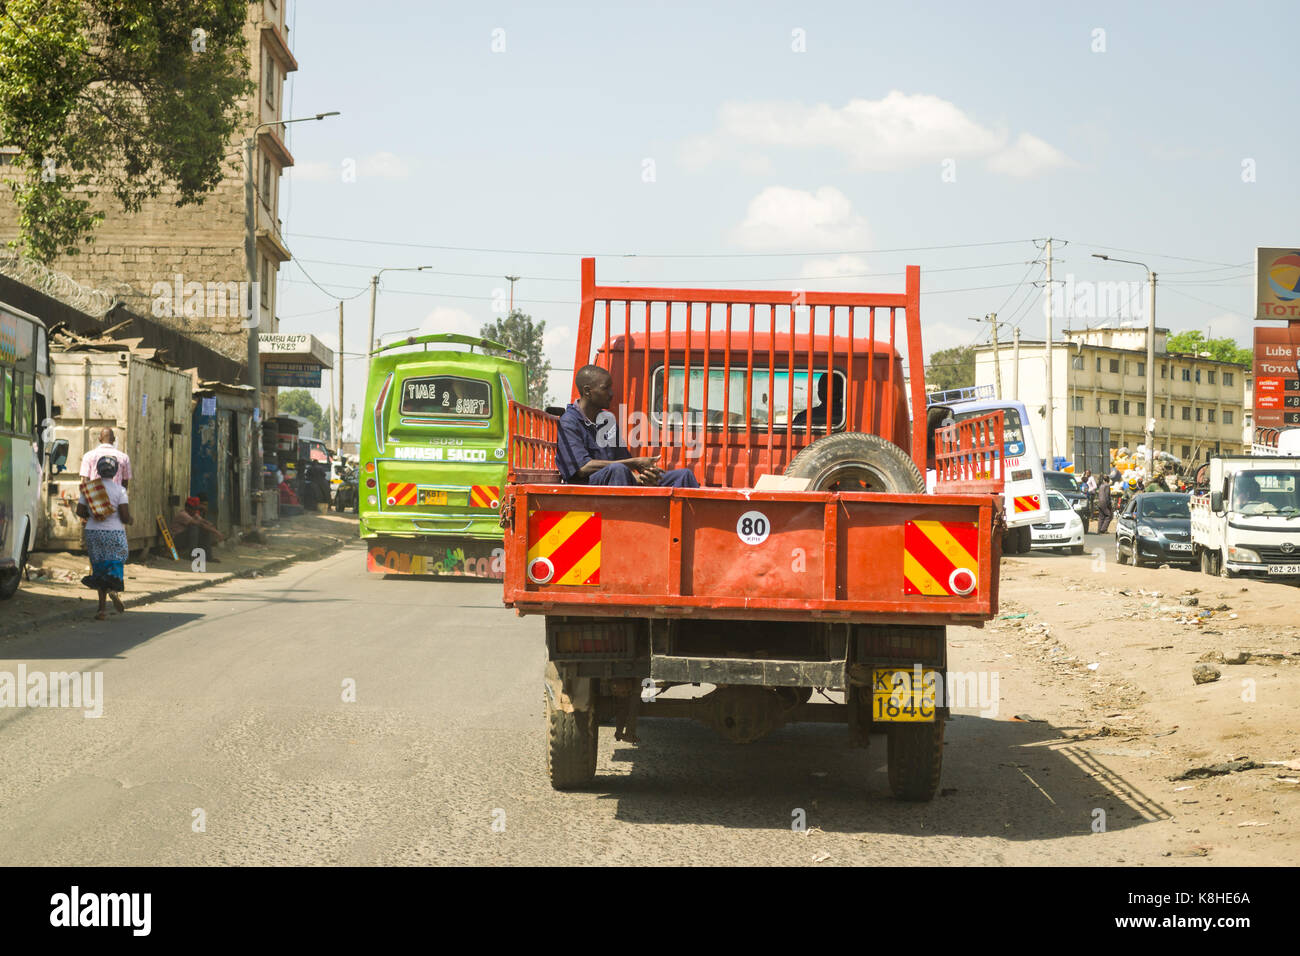 Man sits in back of small open truck as it drives along road with other vehicles on, Nairobi, Kenya Stock Photo